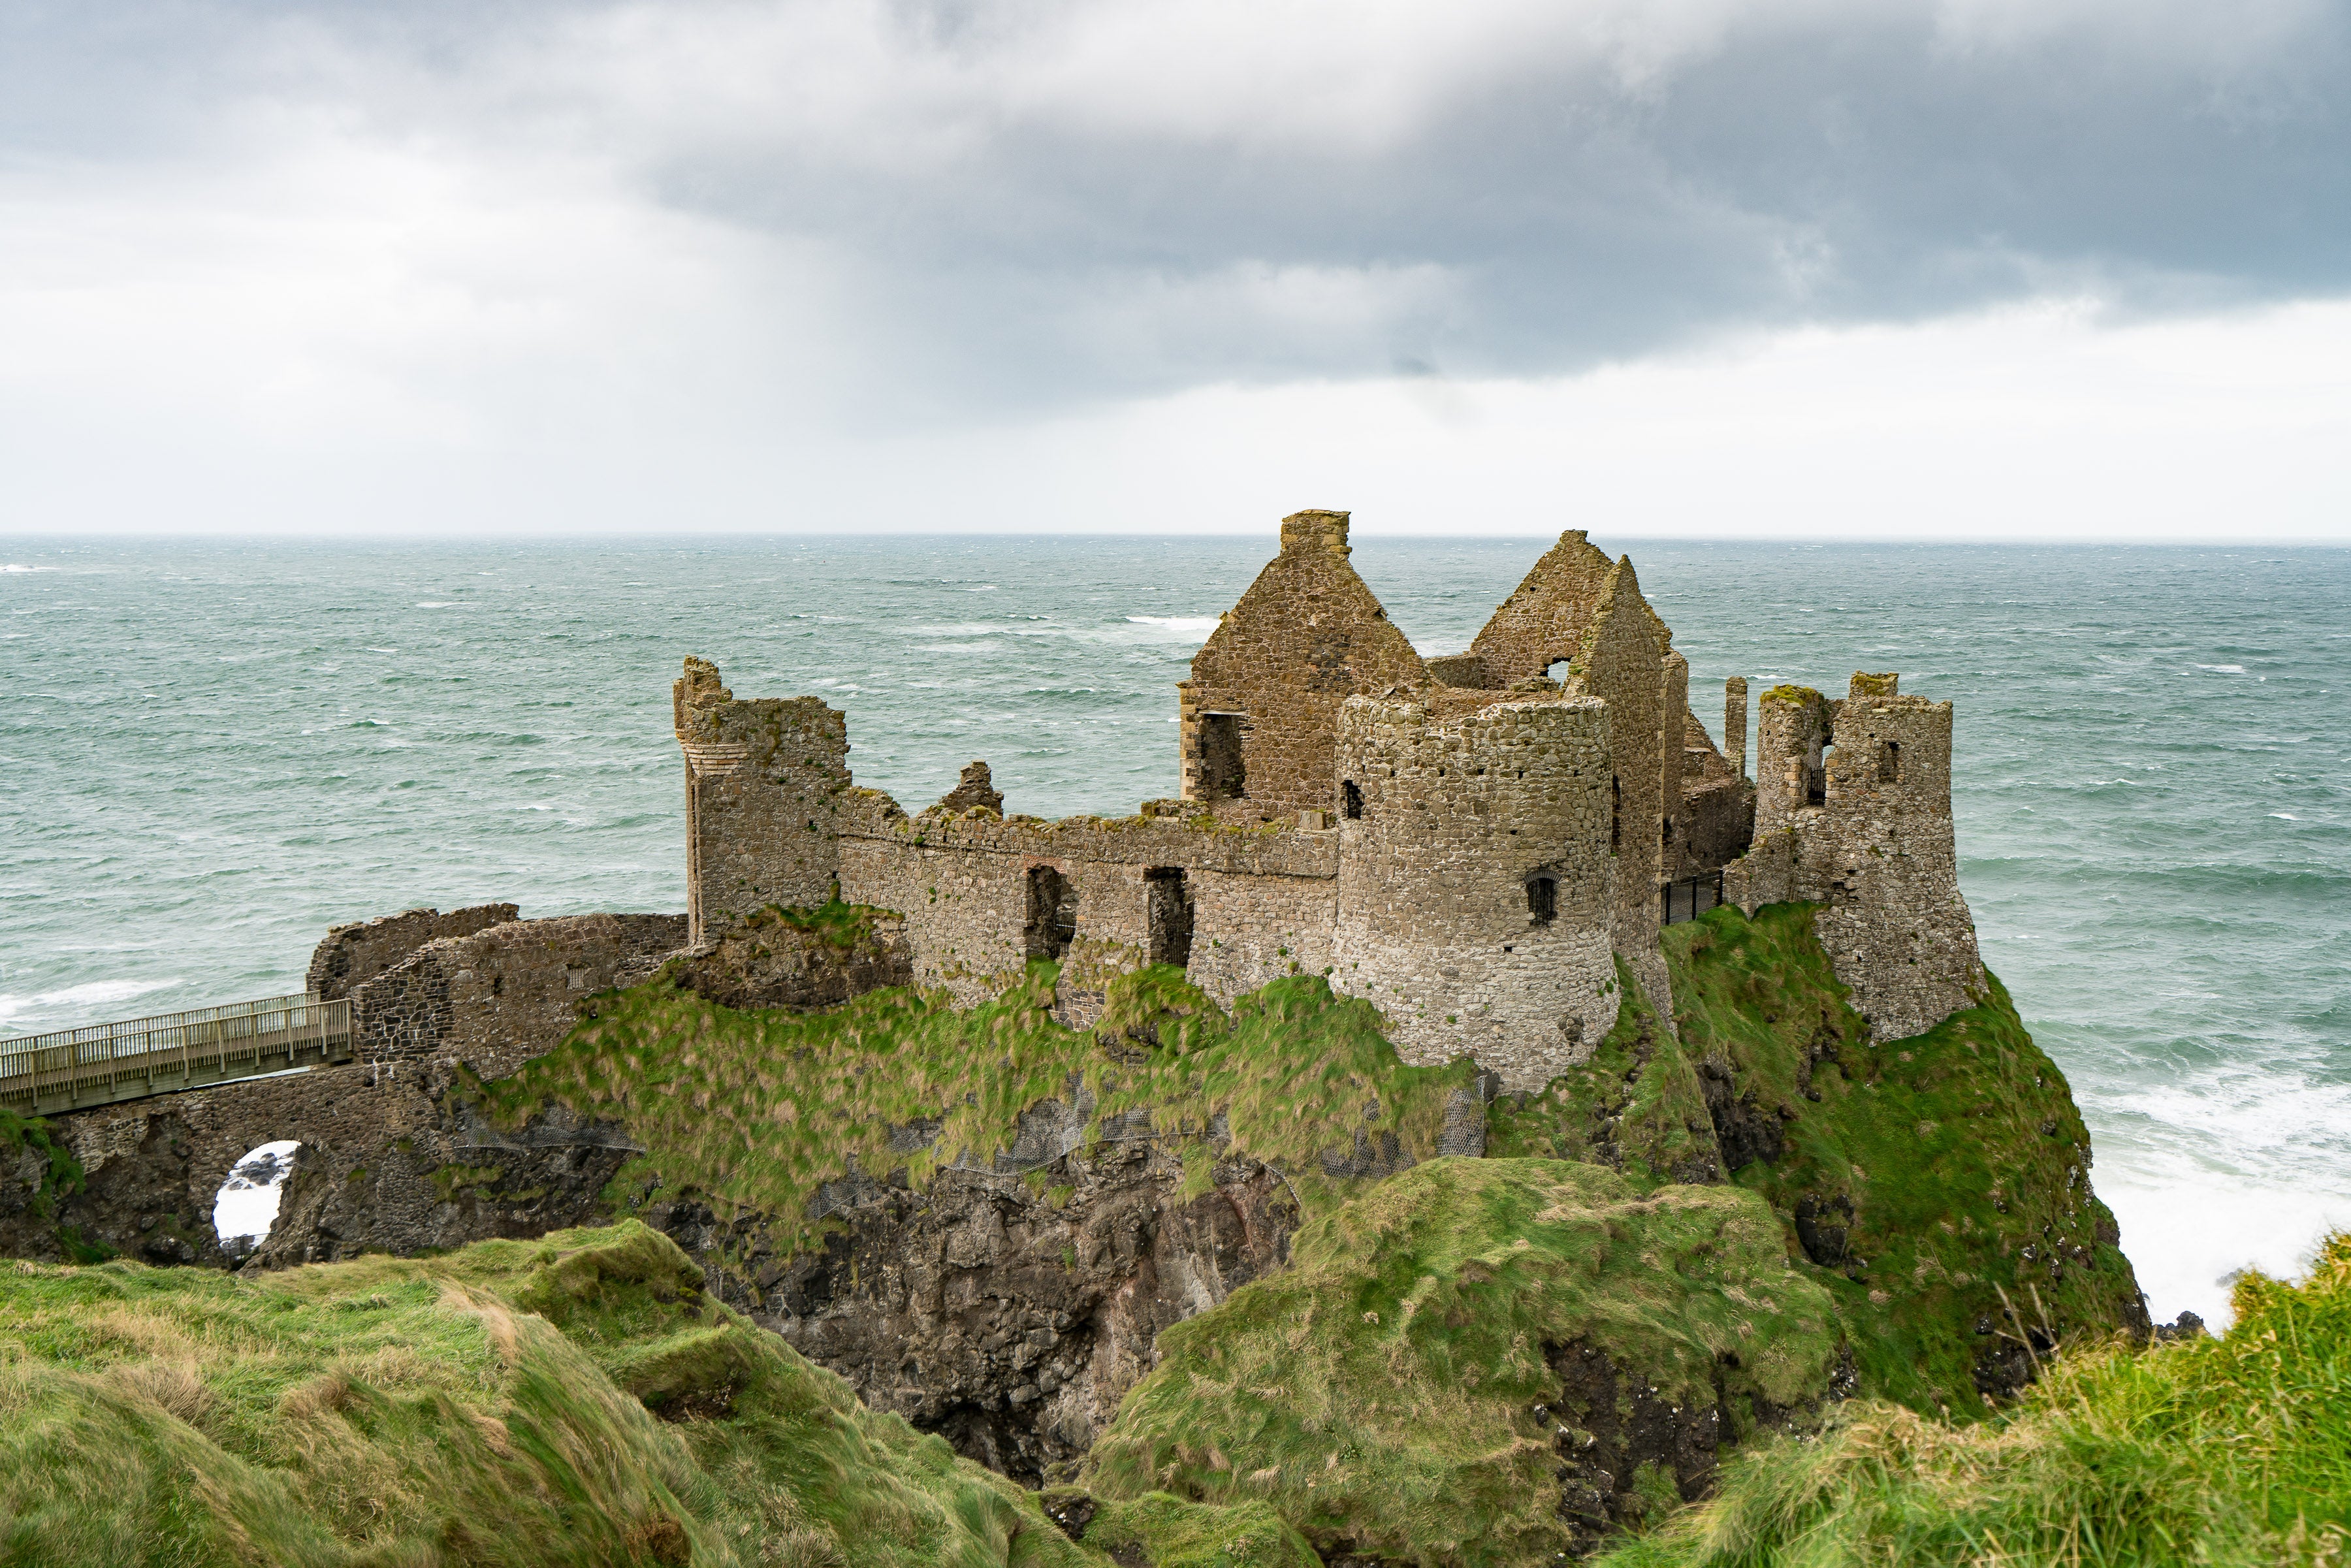 Dunlace Castle, one of many highlights along the Causeway Coast.